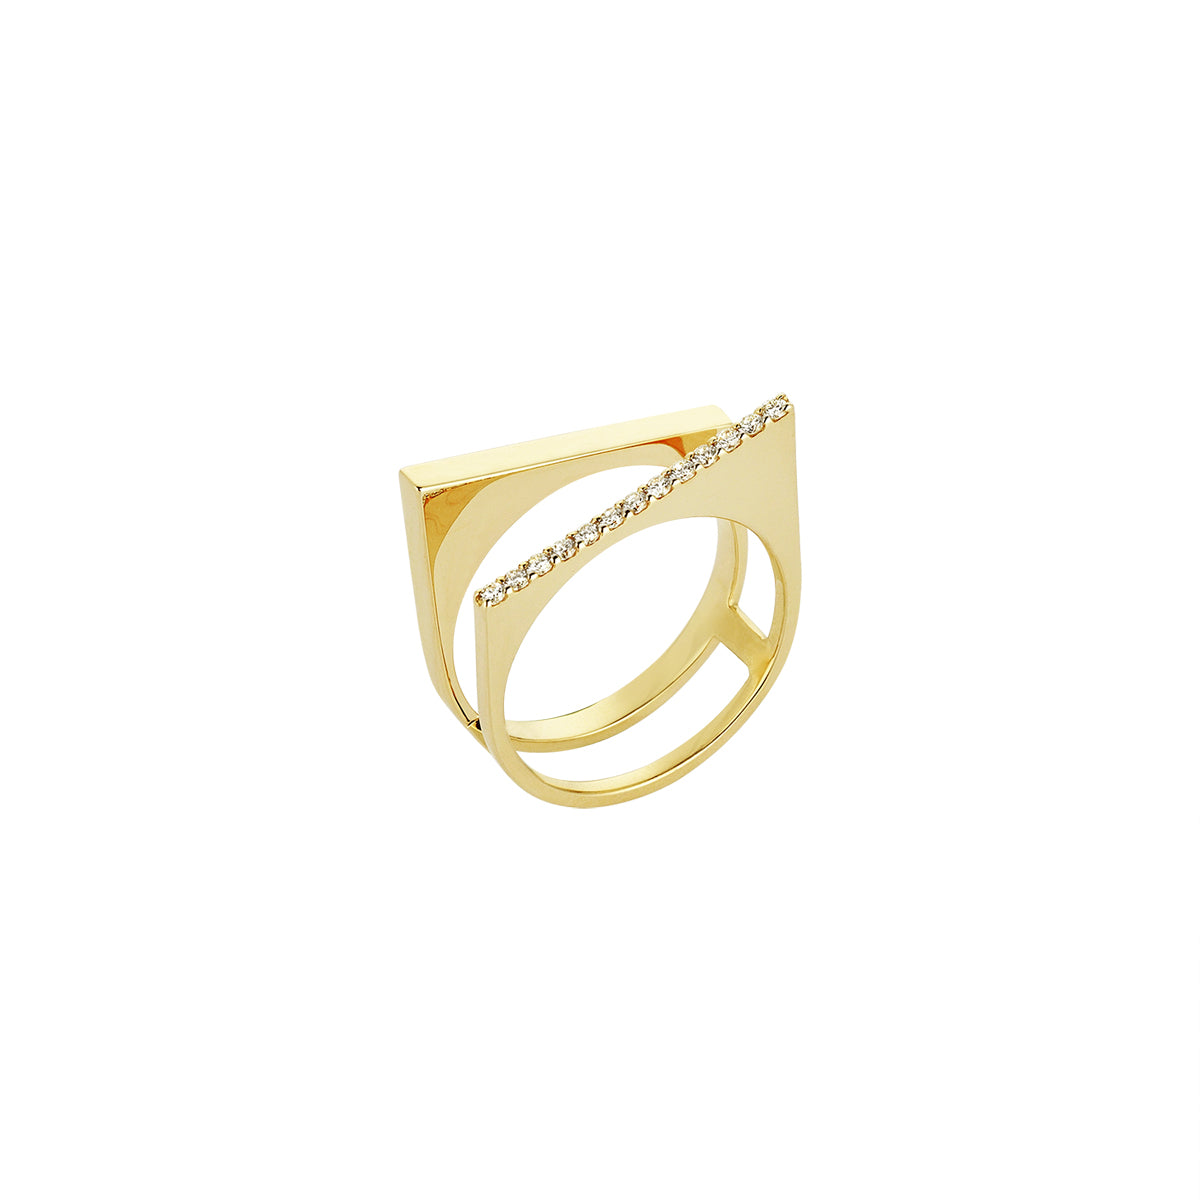 Angled Diamond Double Ring in Yellow Gold - Her Story Shop